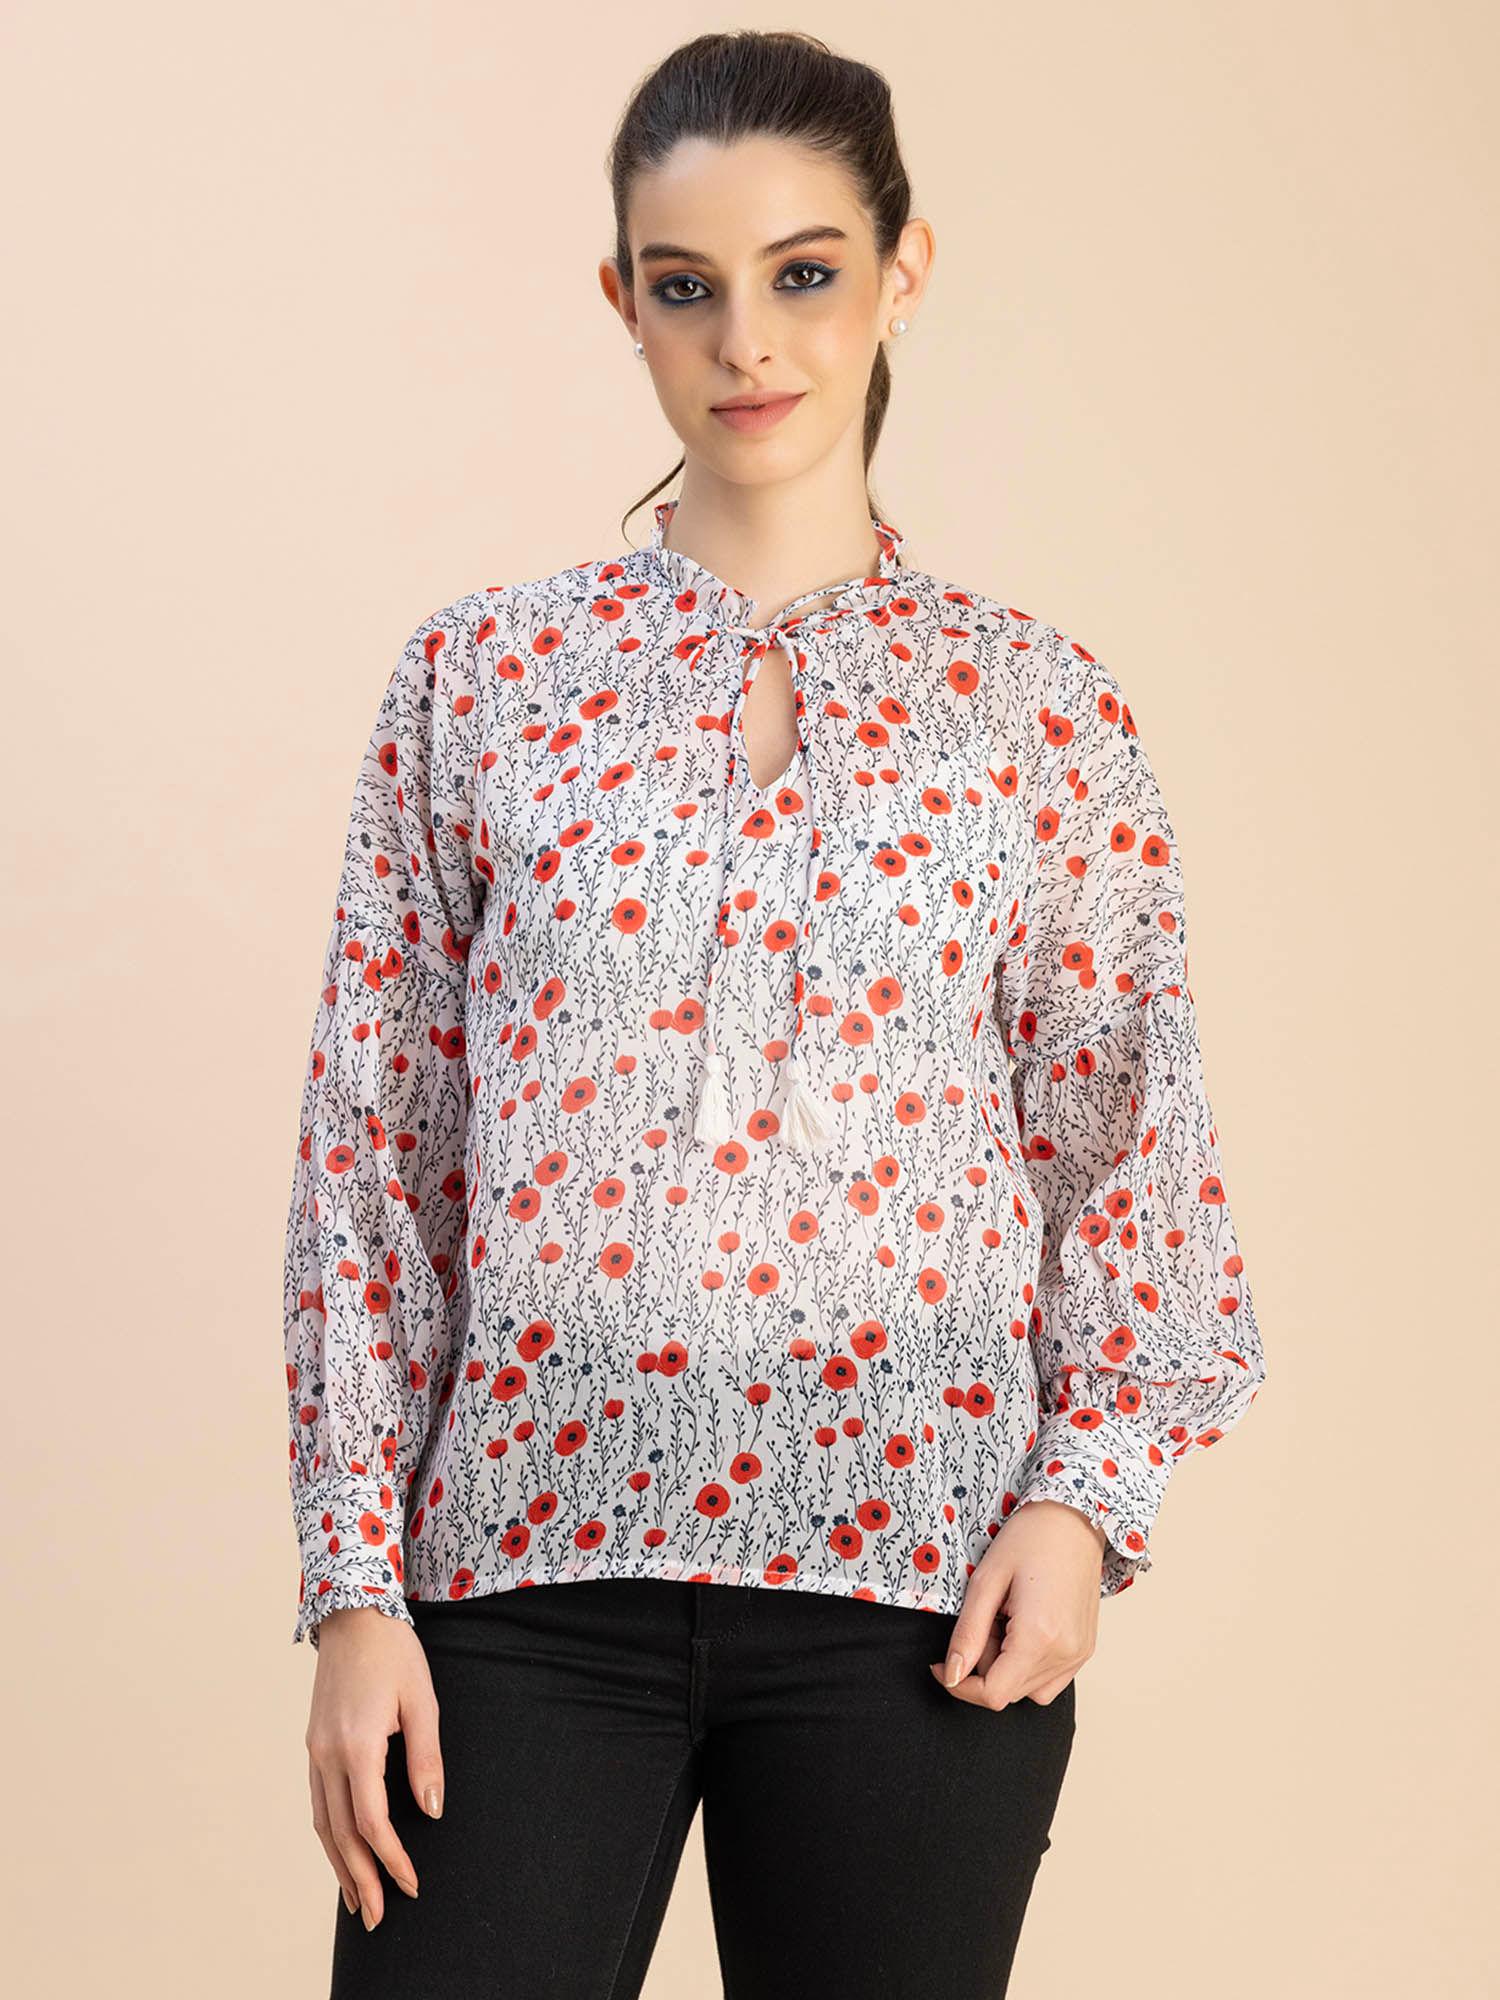 women comfortable fit georgette floral white top